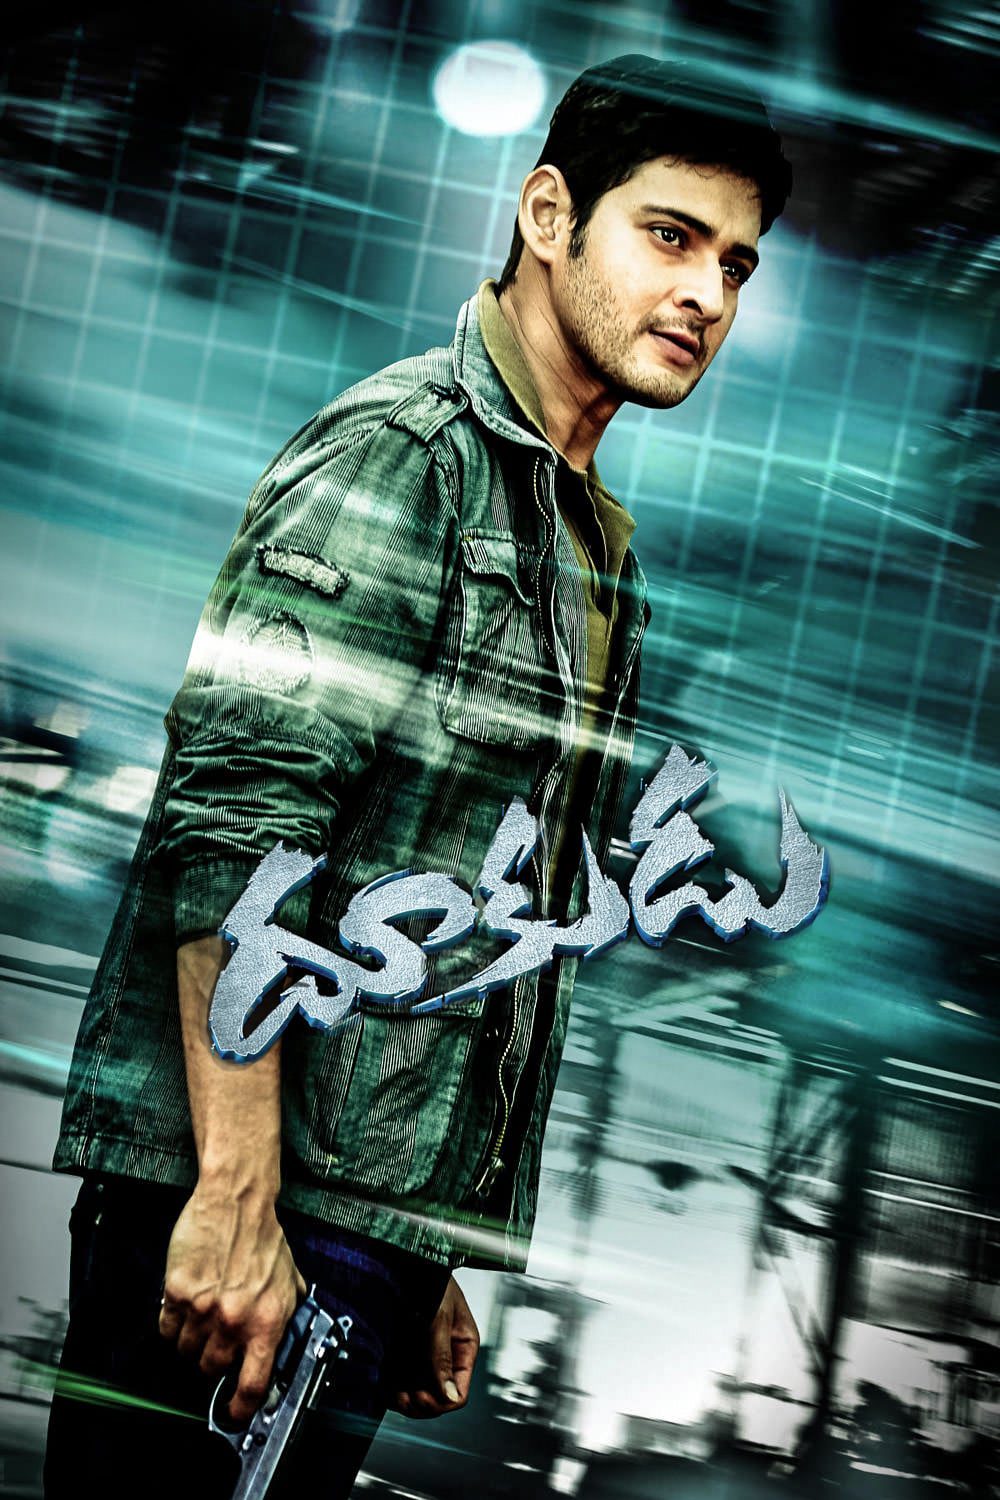 Poster for the movie "Dookudu"